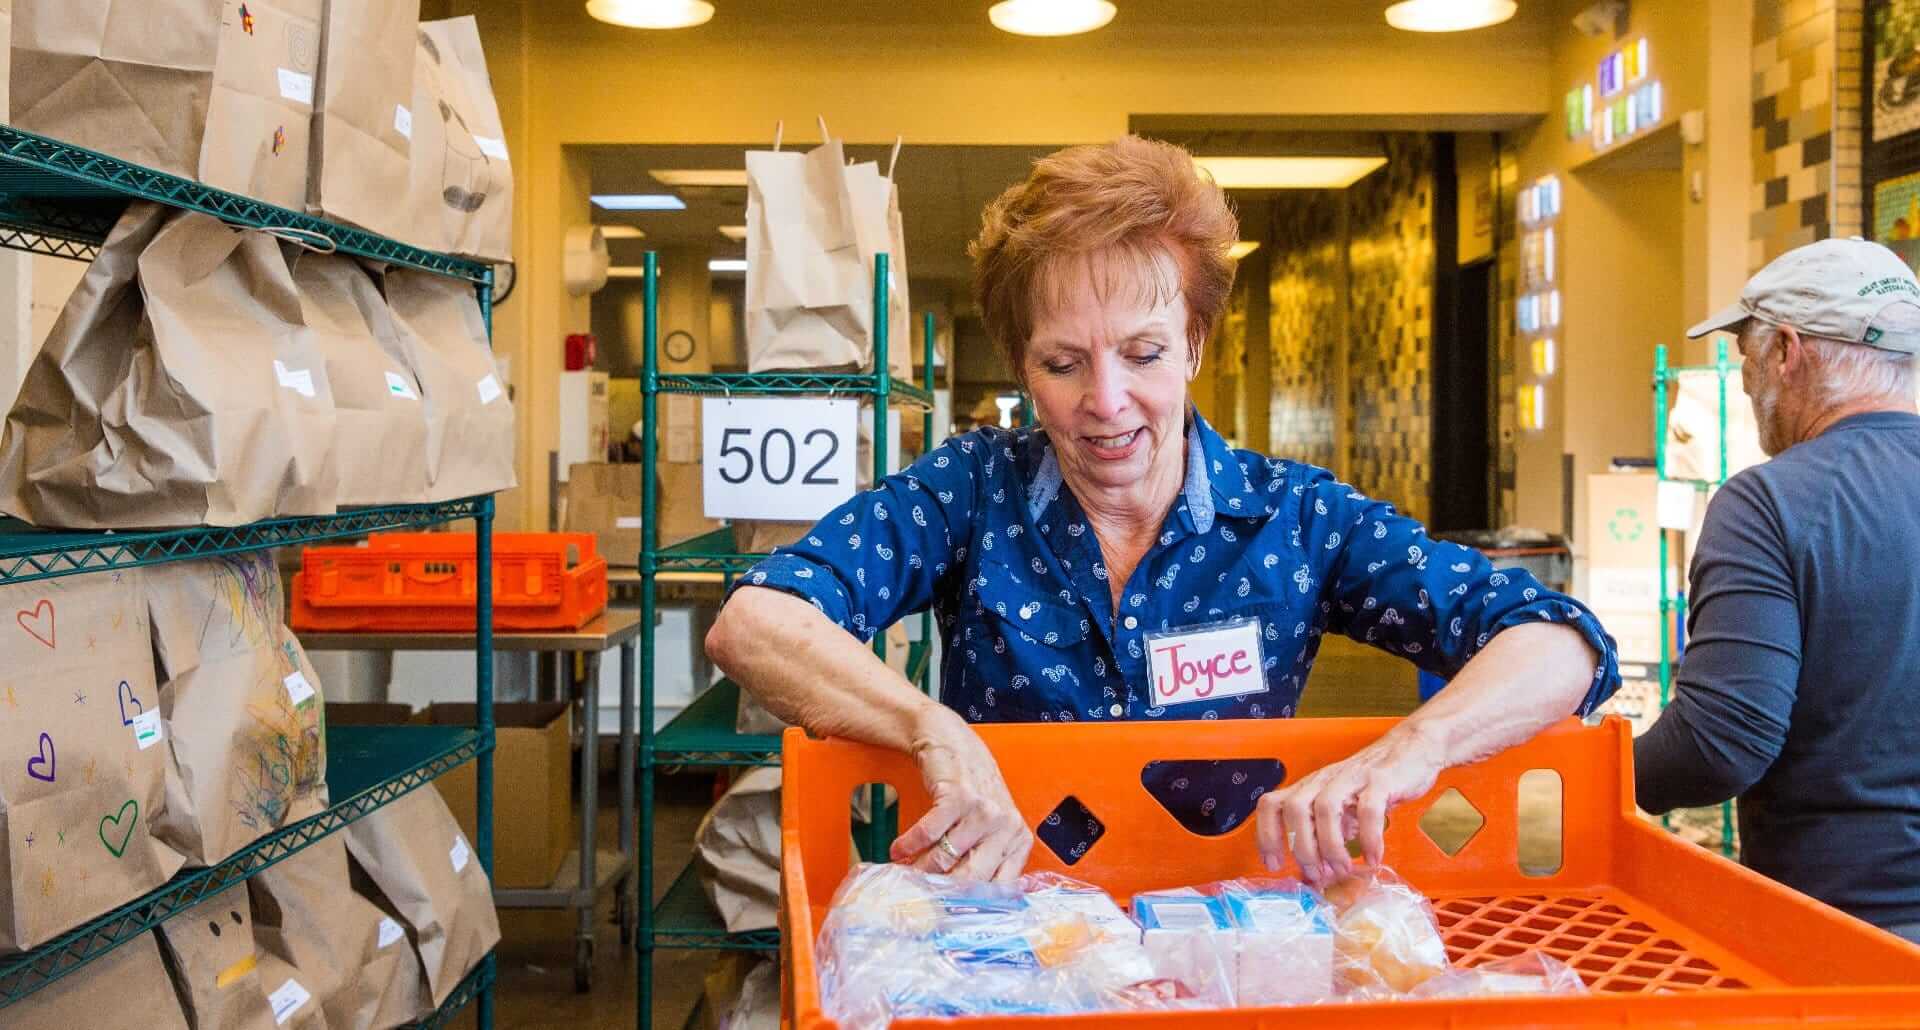 A volunteer packs meal bags for Project Angel Heart clients